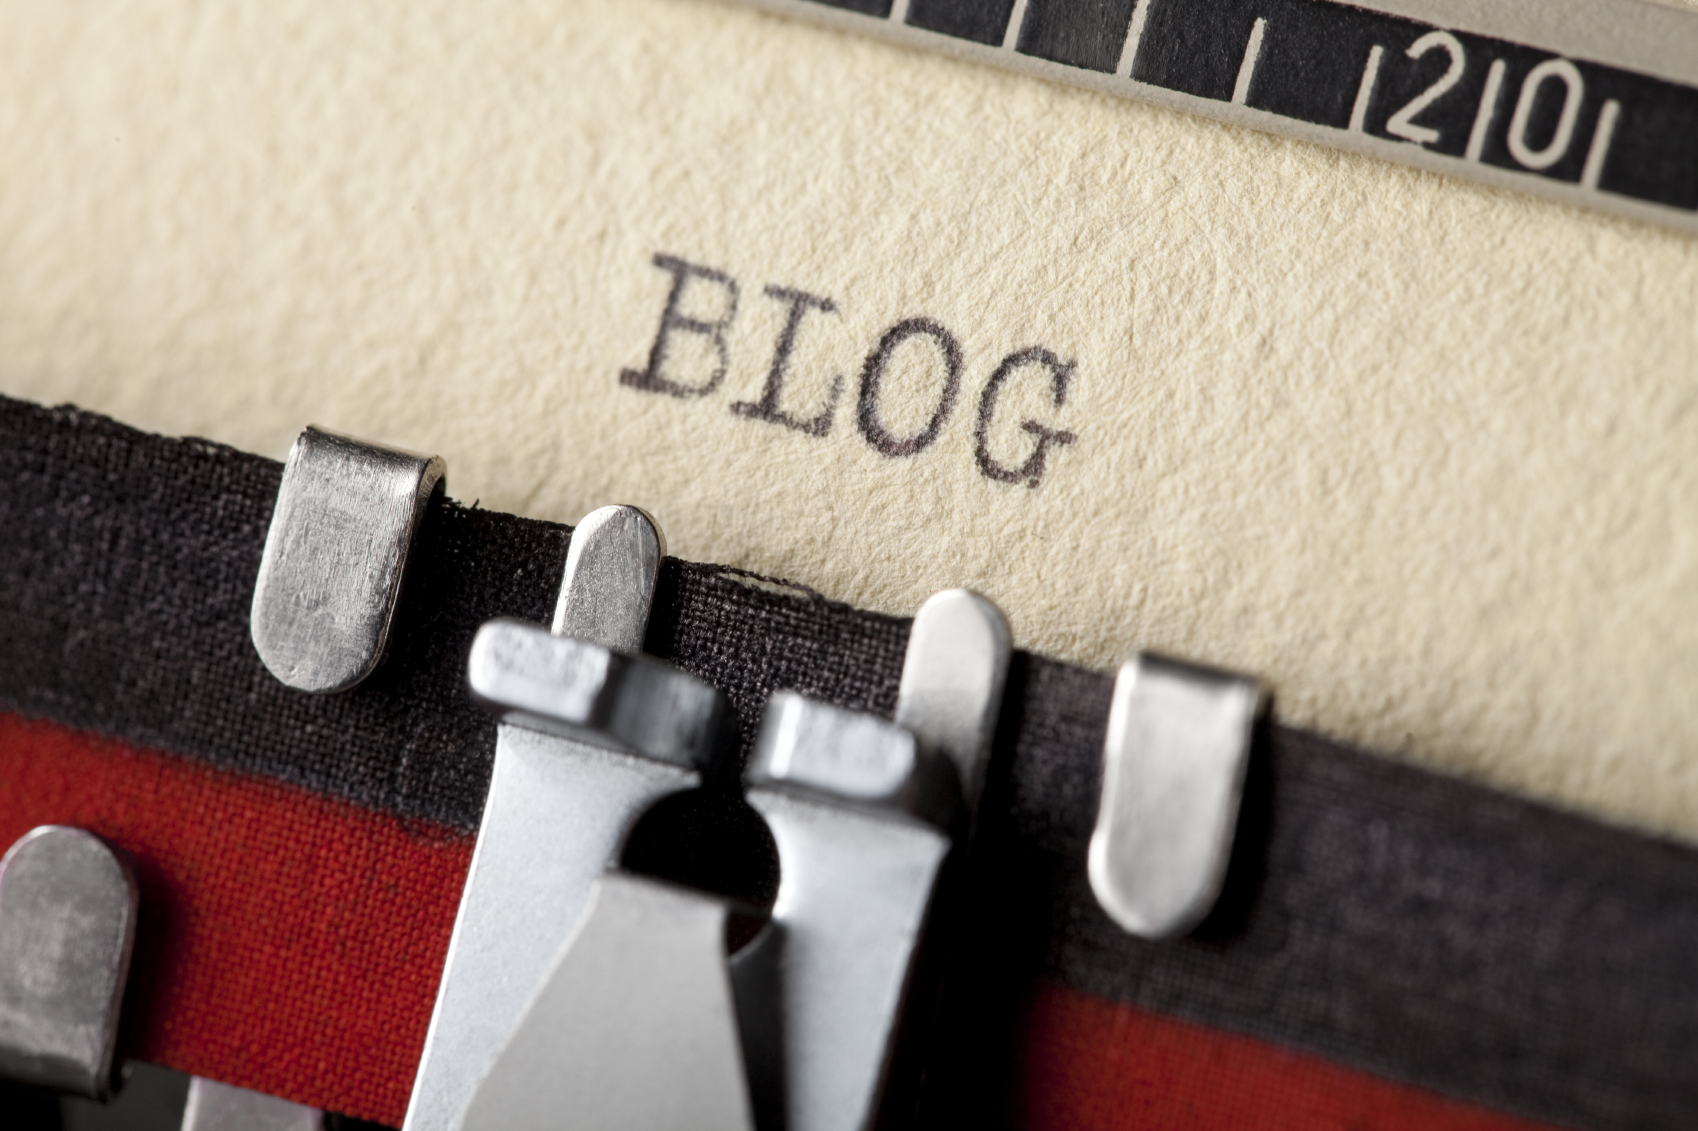 Put Your Blogger Blog on Your Website